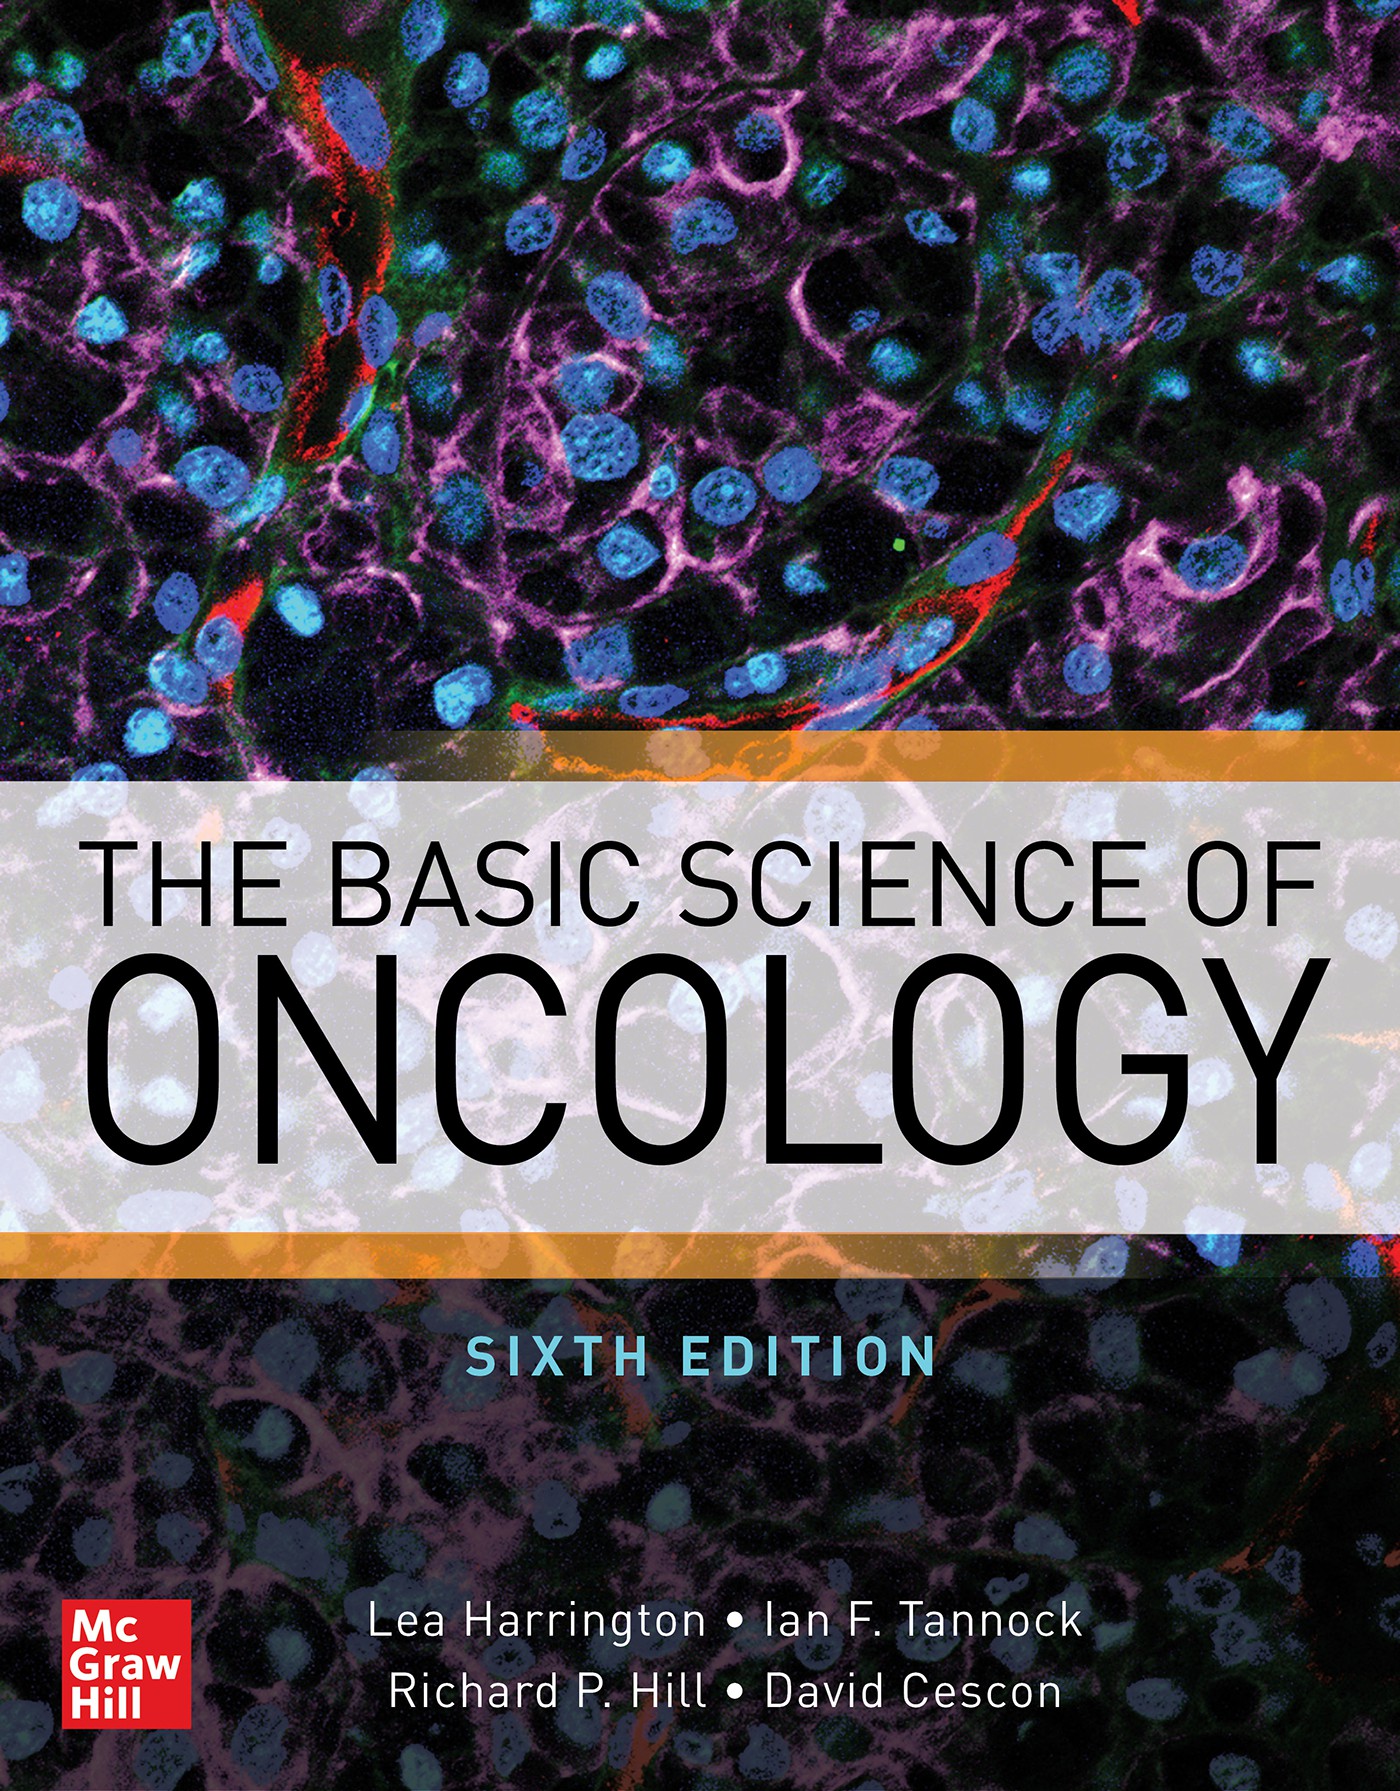 Basic Science of Oncology, 6th ed.